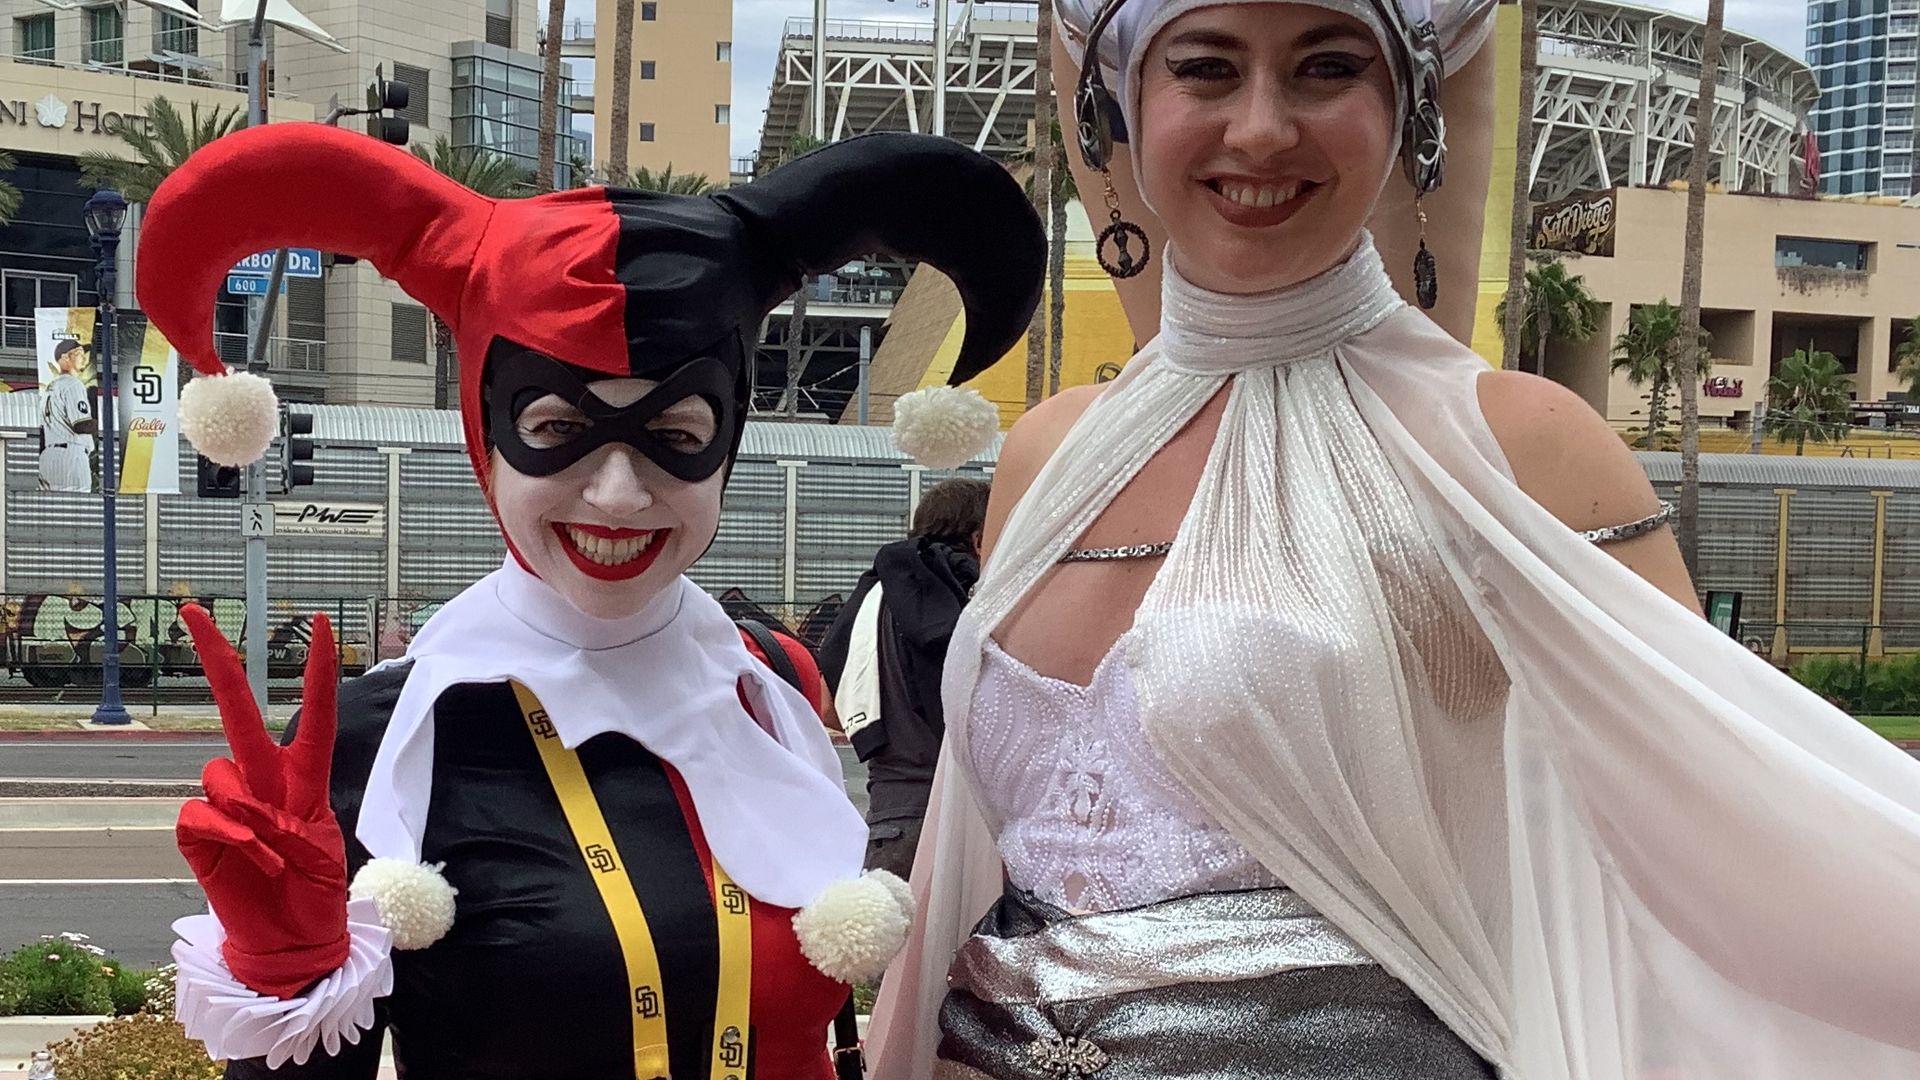 Why Cosplay boosts our confidence and gives a sense of belonging